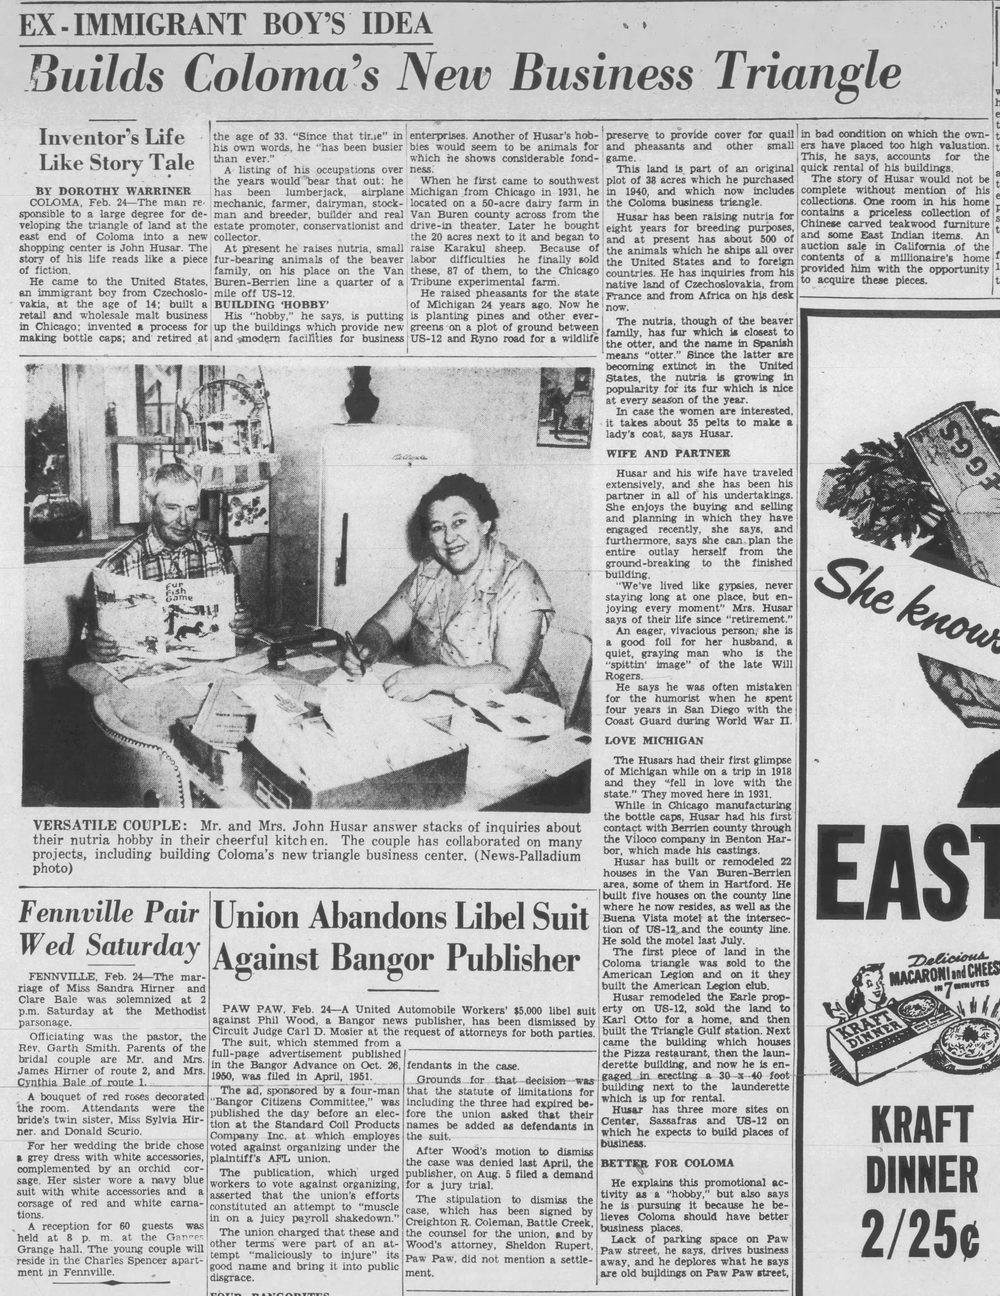 Buena Vista Motel - 1955 Article On Owners